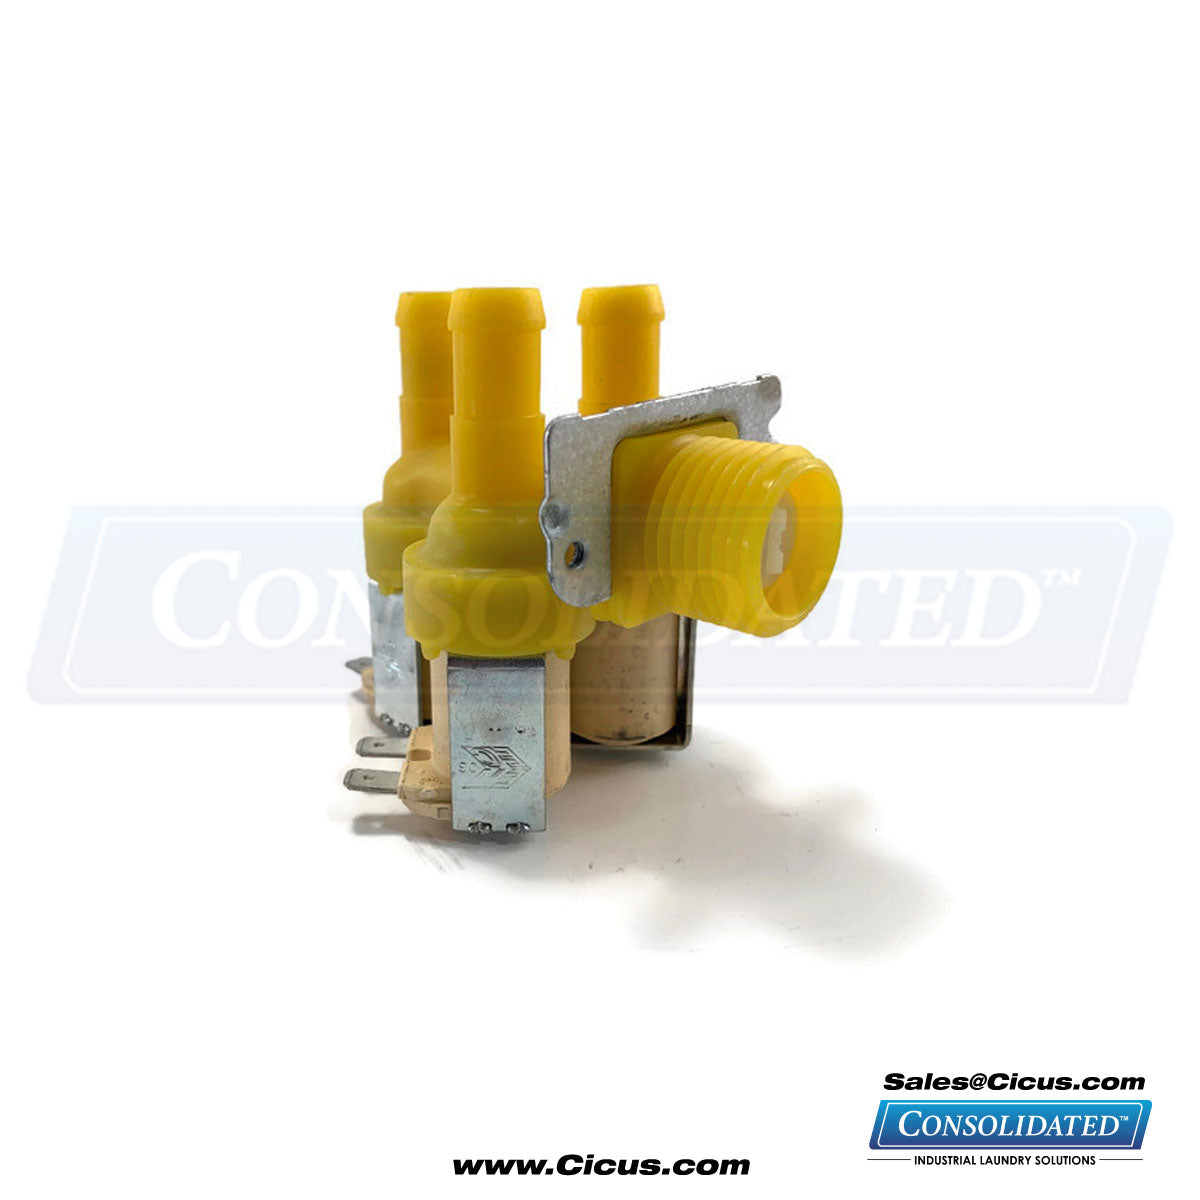 Alliance Laundry Systems 2-Way Water Valve [F8286401P] - Front View